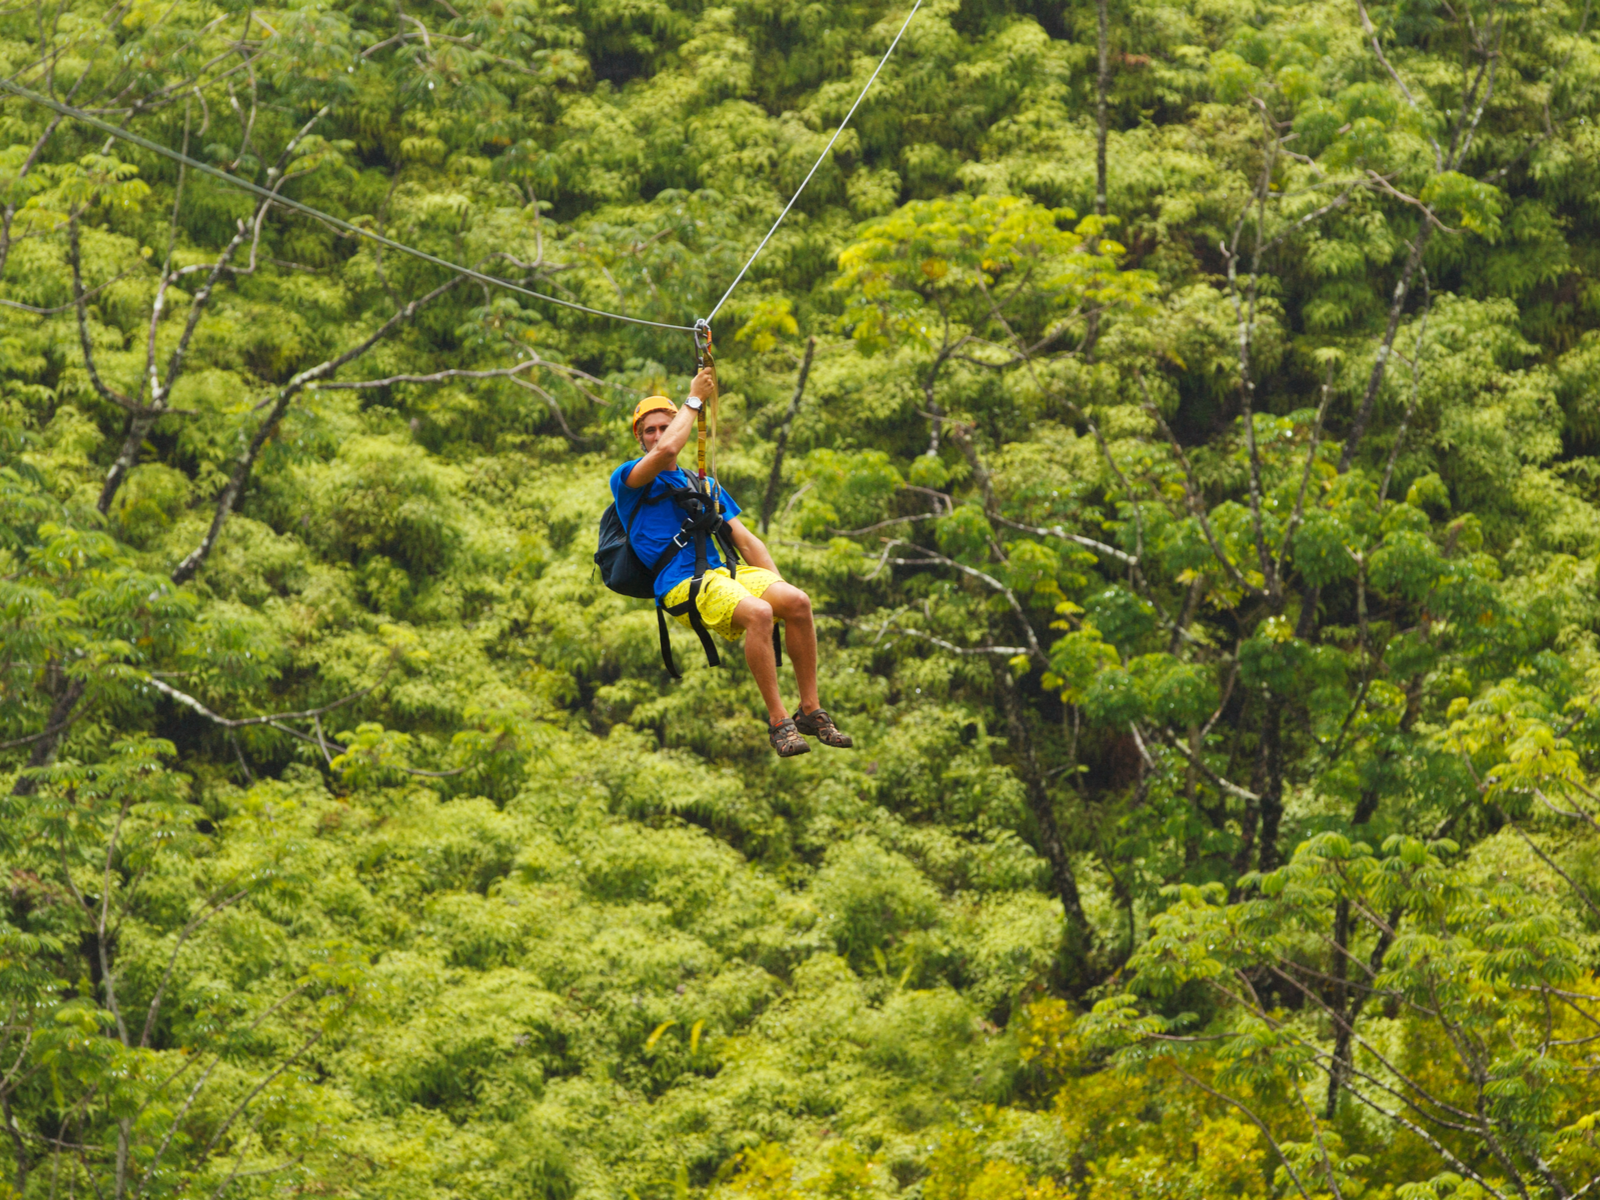 A man wearing a blue shirt ziplines over a lush tropical forest, this is one of the best things to do in Kauai